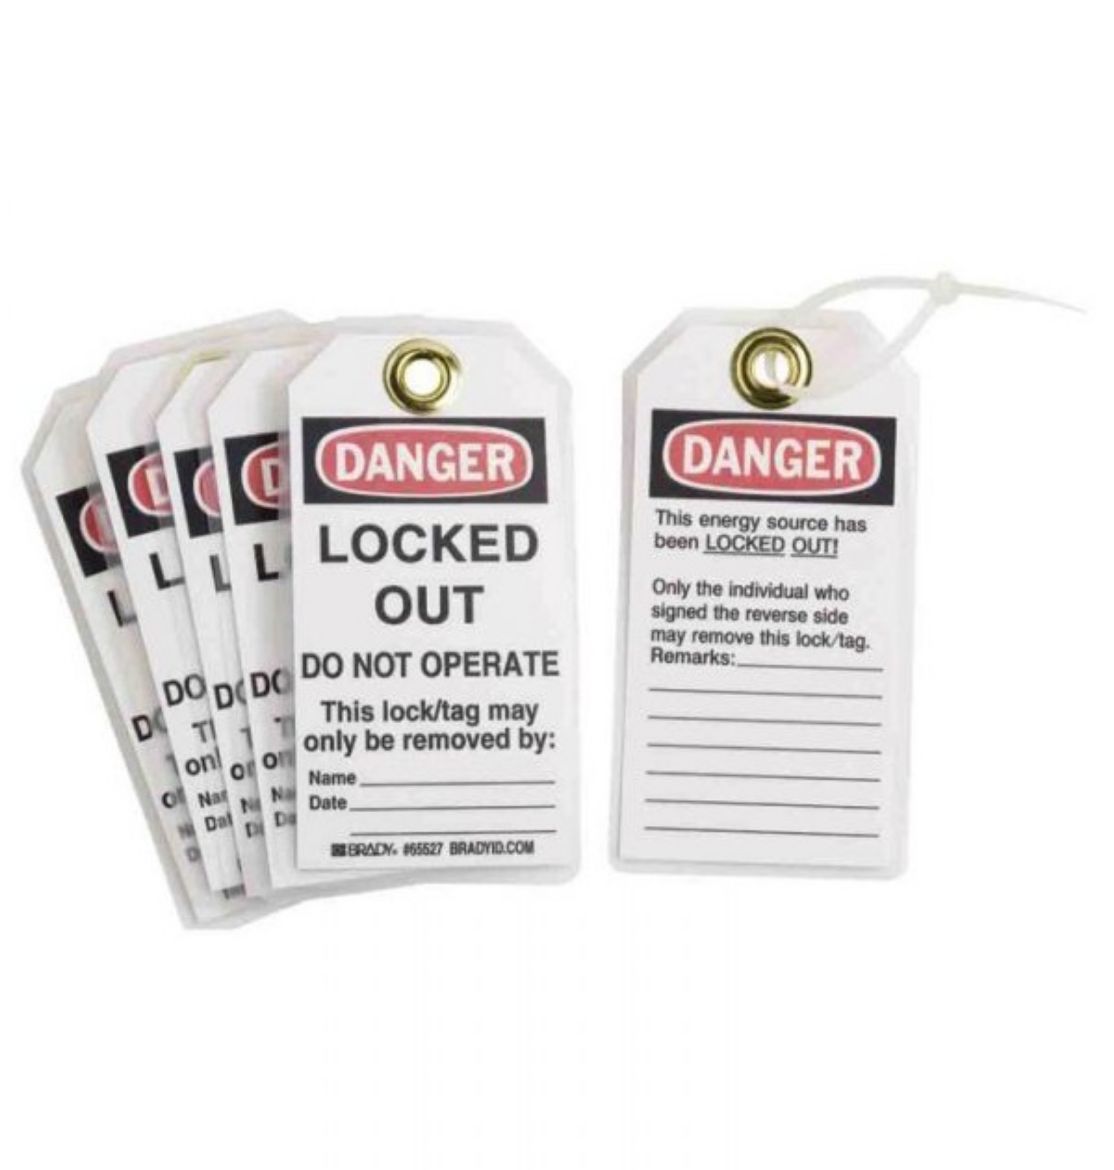 Picture of DANGER LOCKED OUT LOCKOUT TAGS - REVERSE SIDE ONLY THE INDIVIDUAL WHO, CARDSTOCK